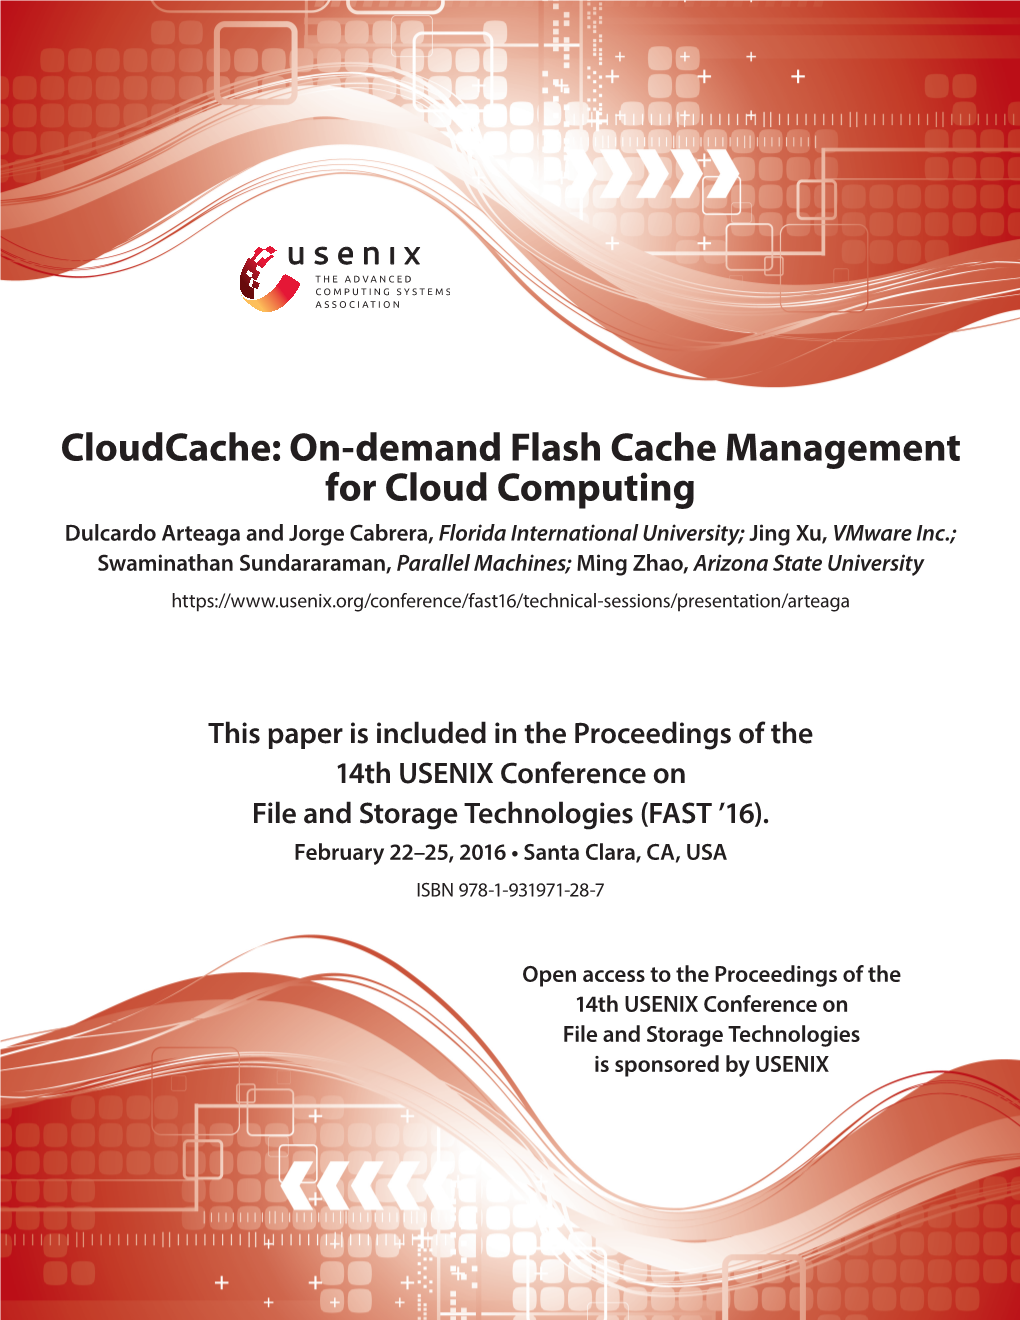 On-Demand Flash Cache Management for Cloud Computing